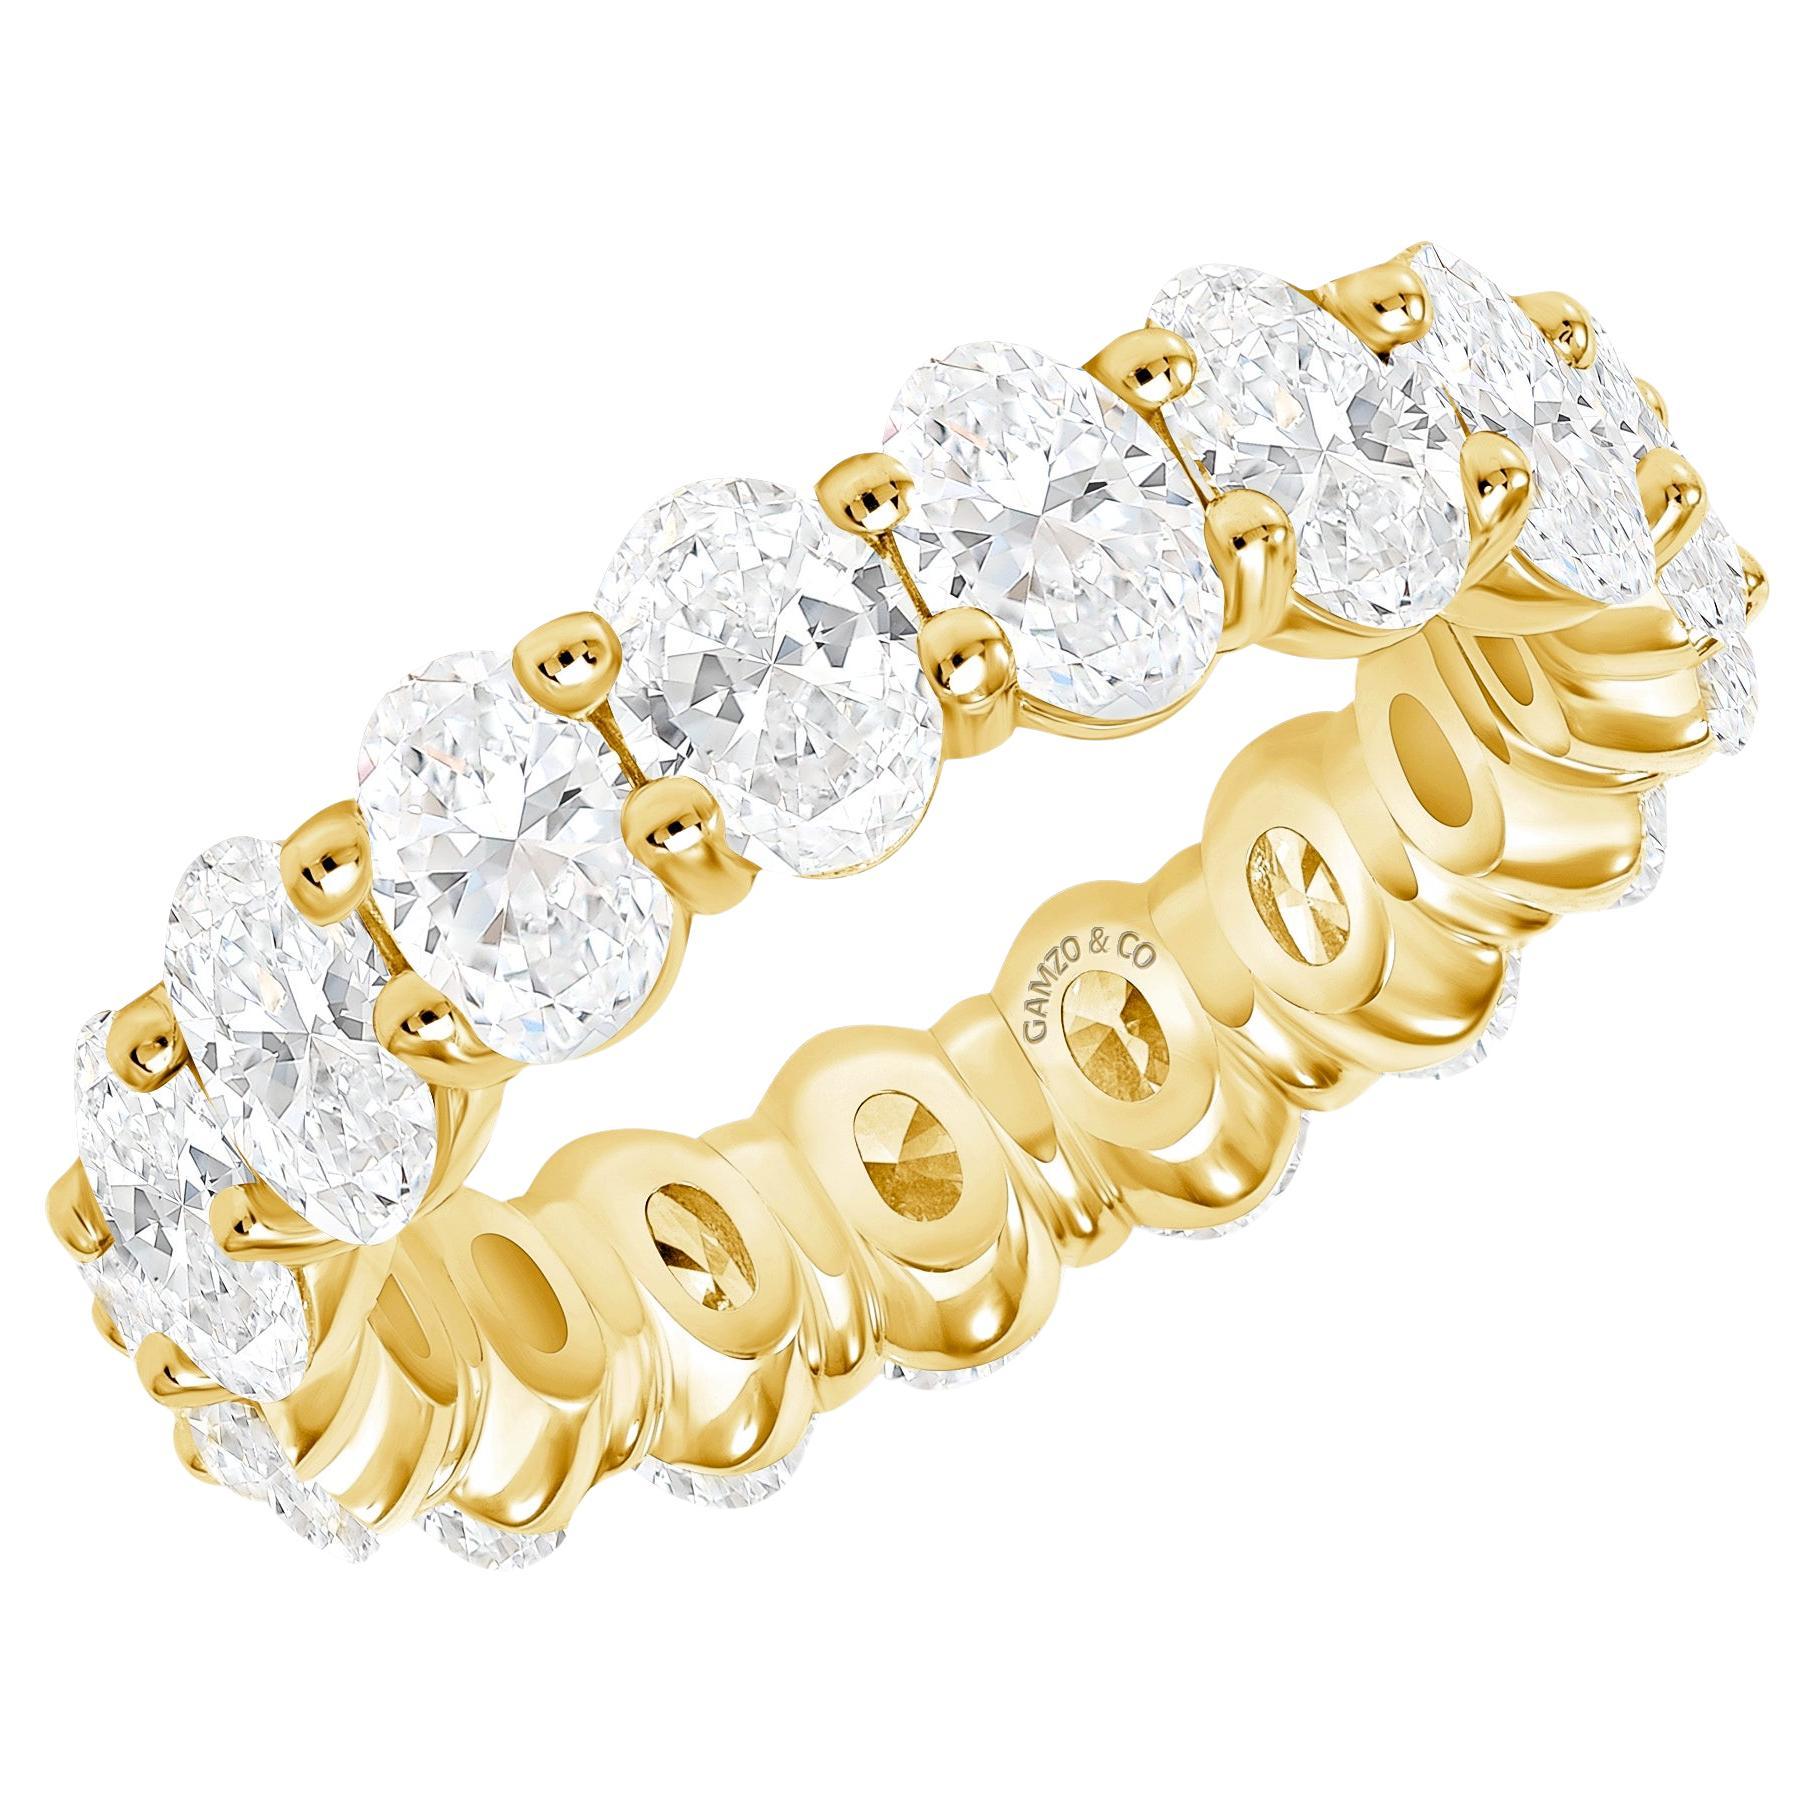 For Sale:  18k Yellow Gold 2 Carat Oval Cut Natural Diamond Eternity Ring